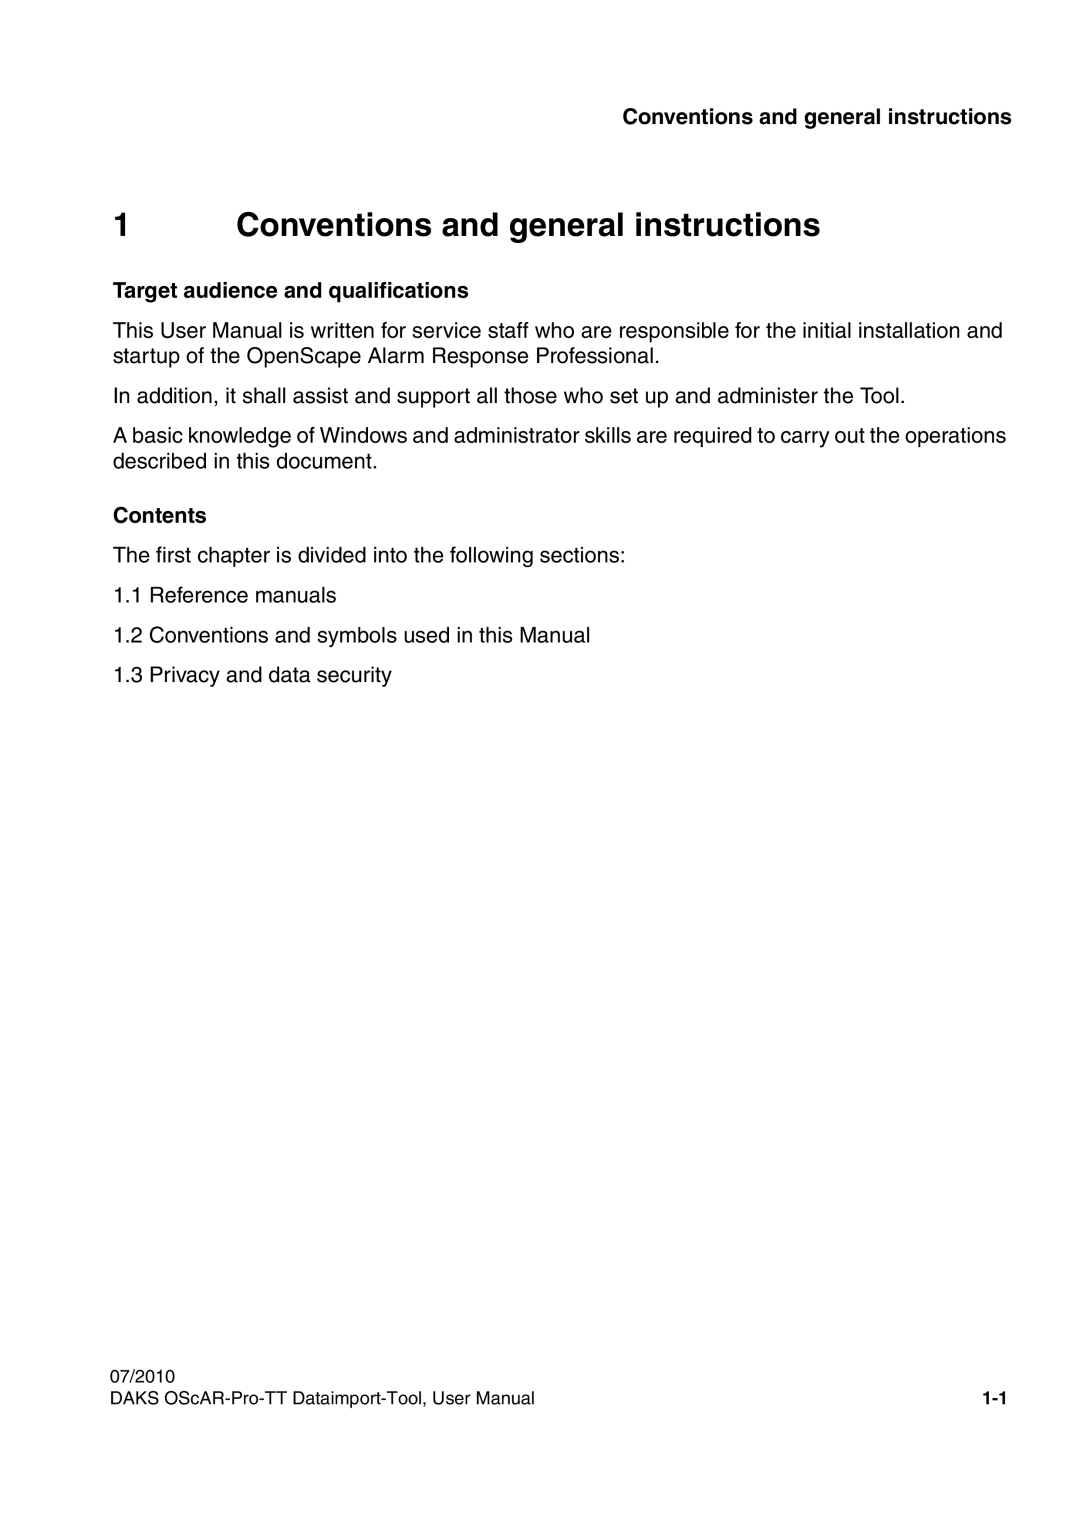 Siemens A31003-S1730-U102-1-7619 Conventions and general instructions, Target audience and qualifications, Contents 